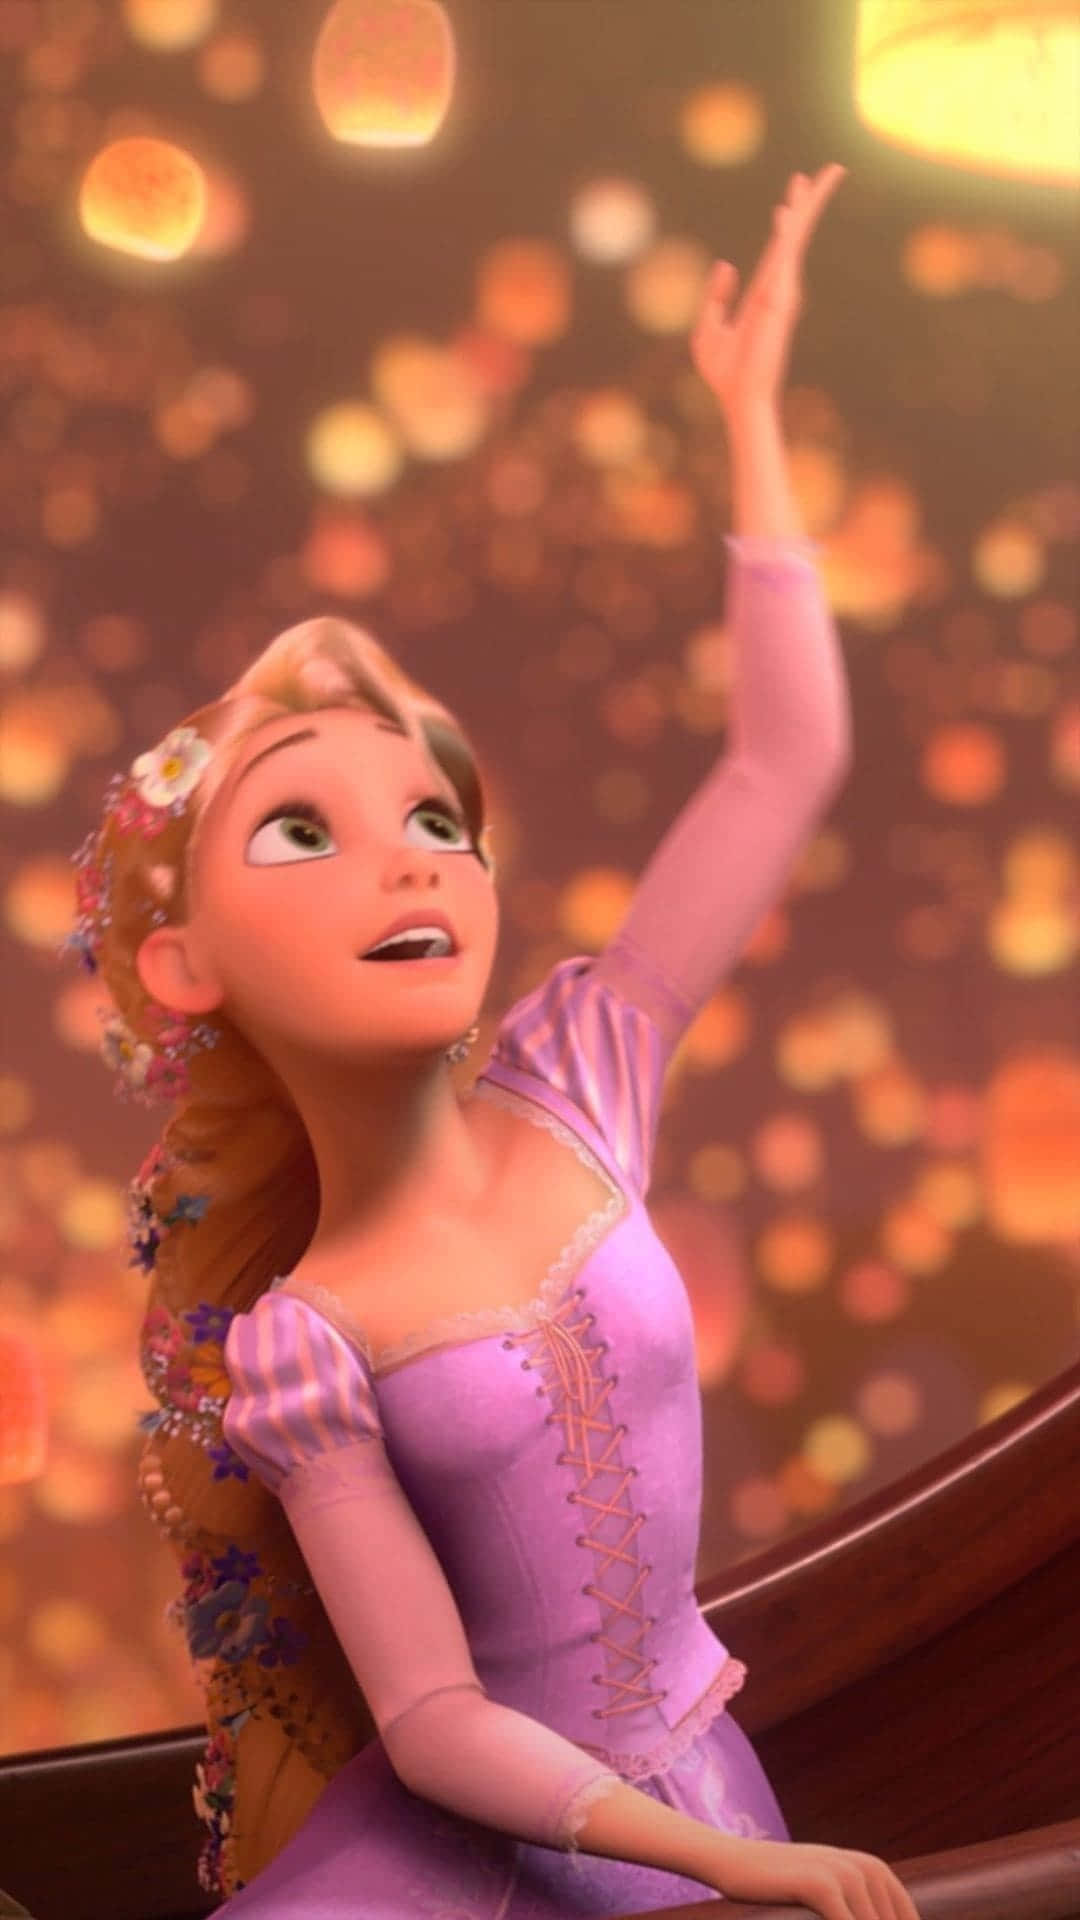 Rapunzel with her long golden hair atop the tower